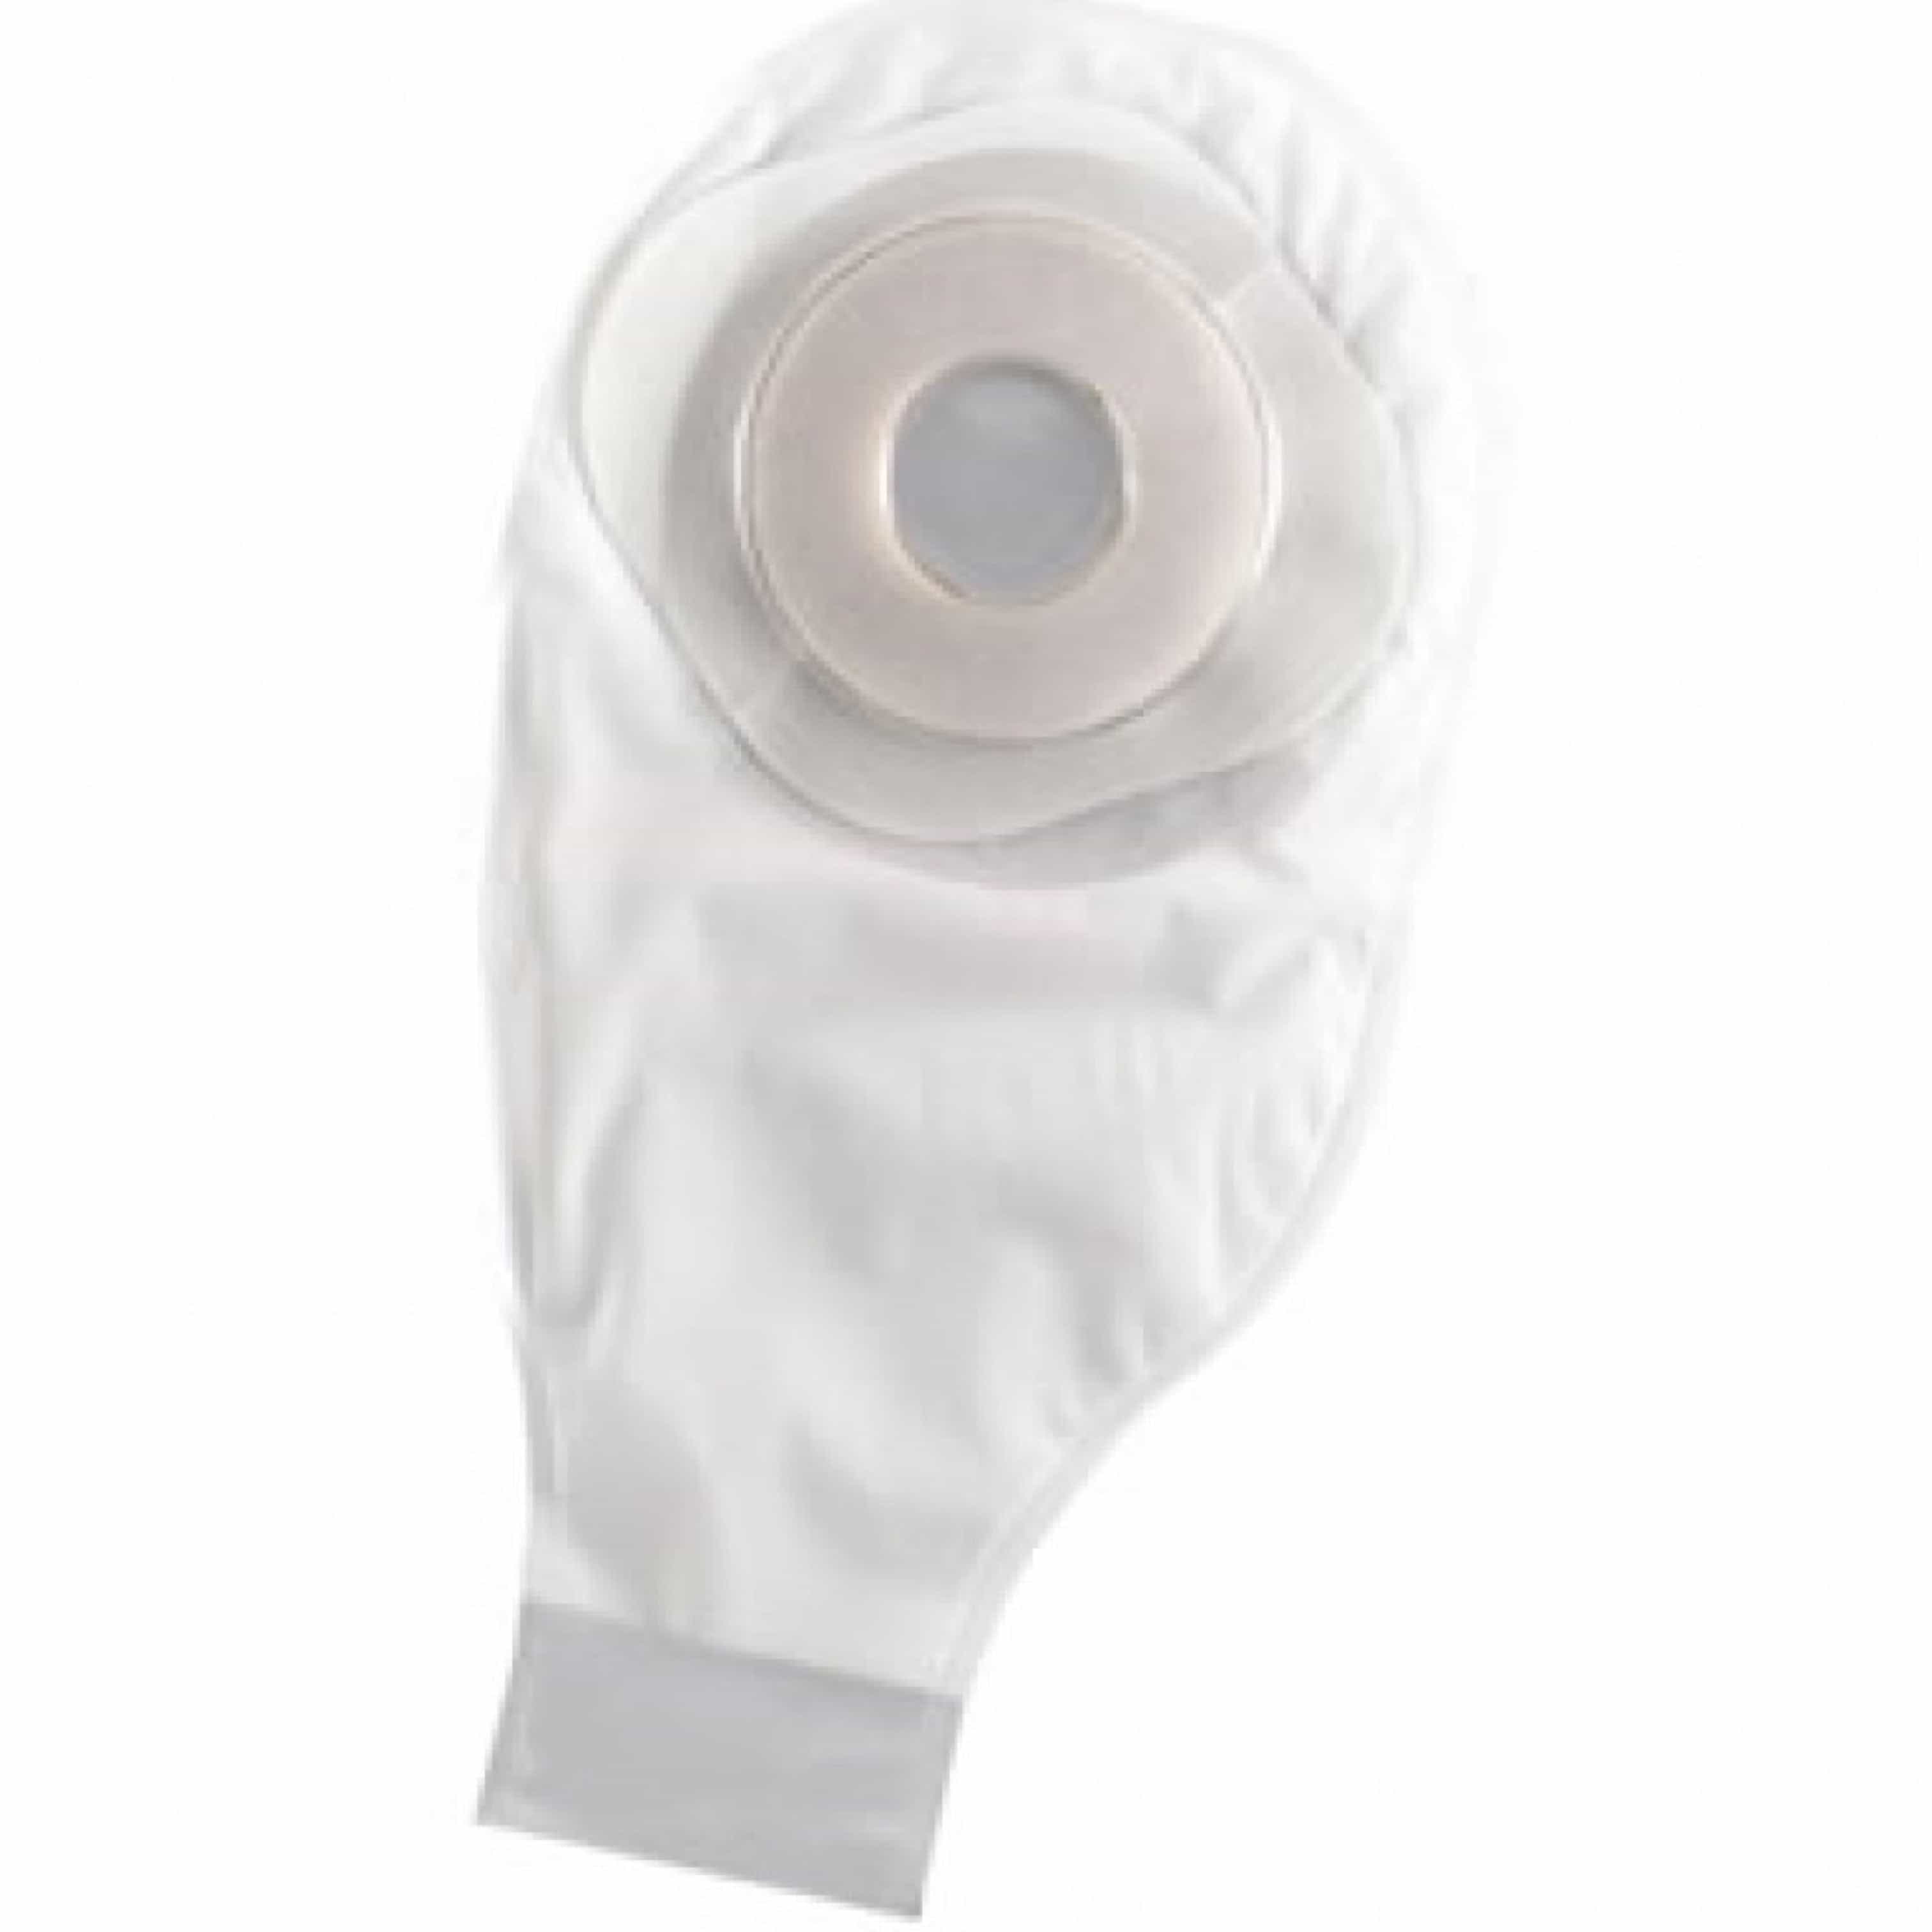 ActiveLife One-Piece Pre-Cut 45 mm Drainable Pouch 12